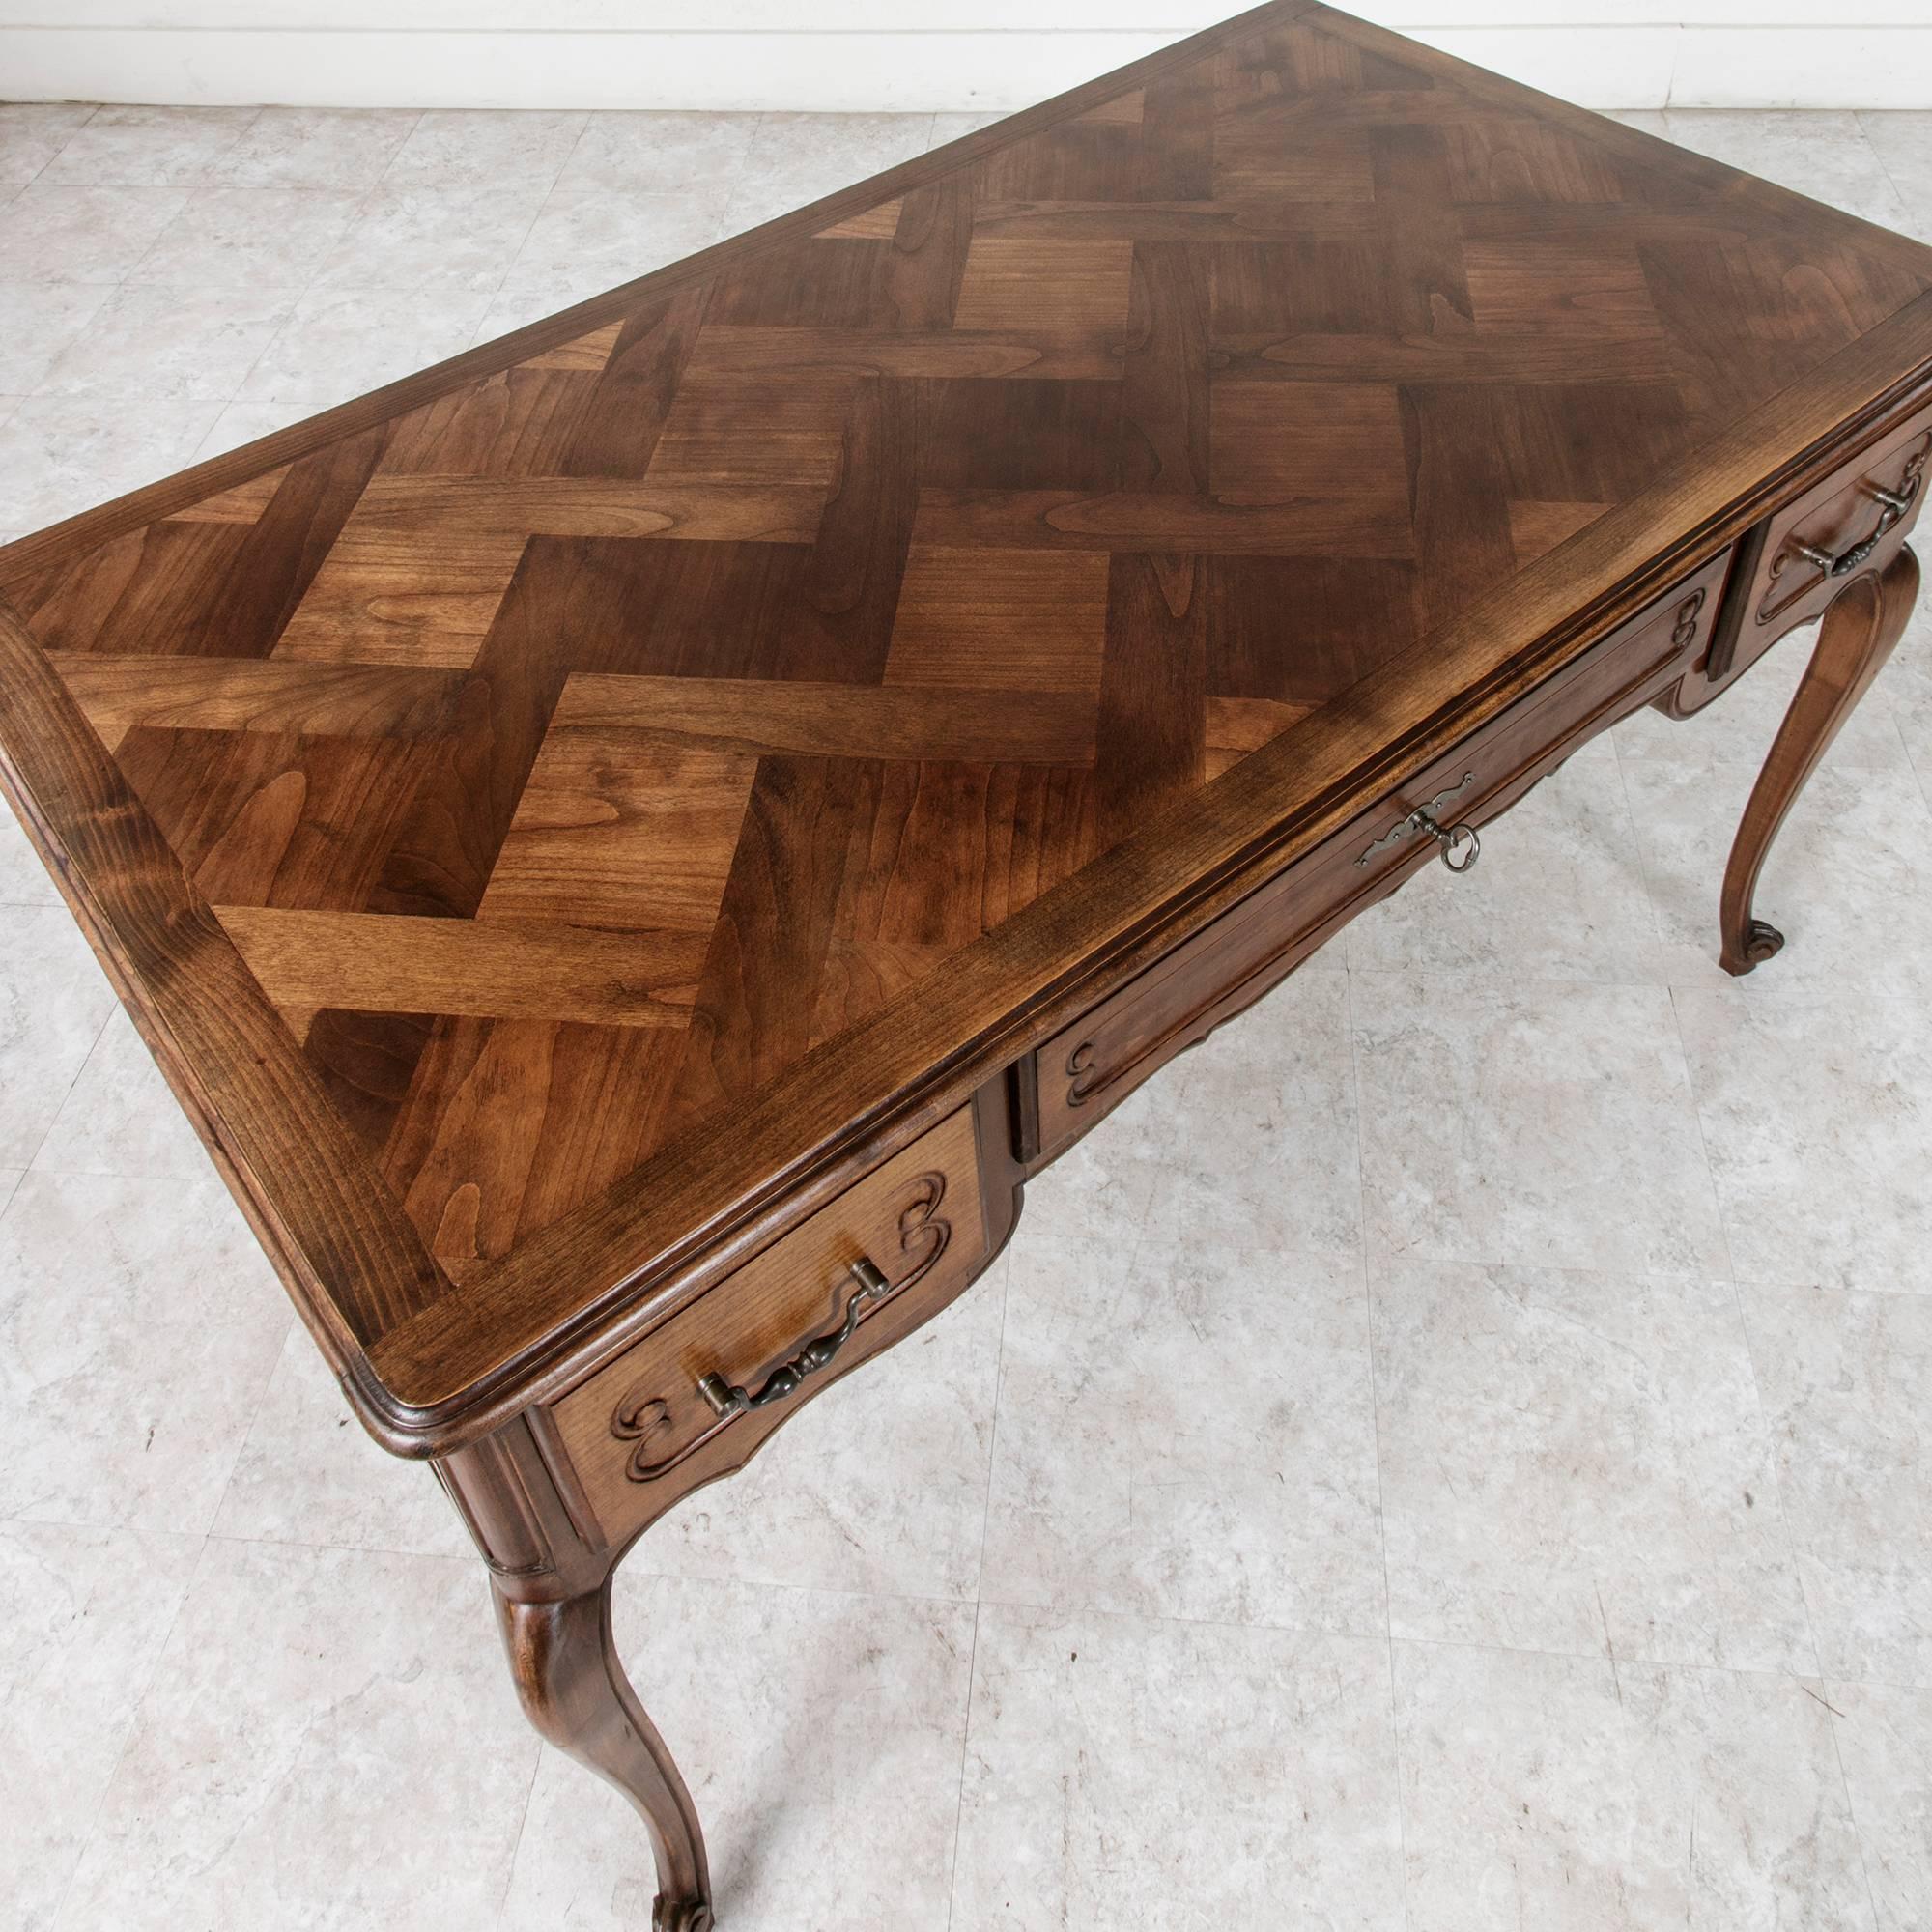 French Mid-20th Century Louis XV Style Walnut Desk with Parquet Top and Three Drawers